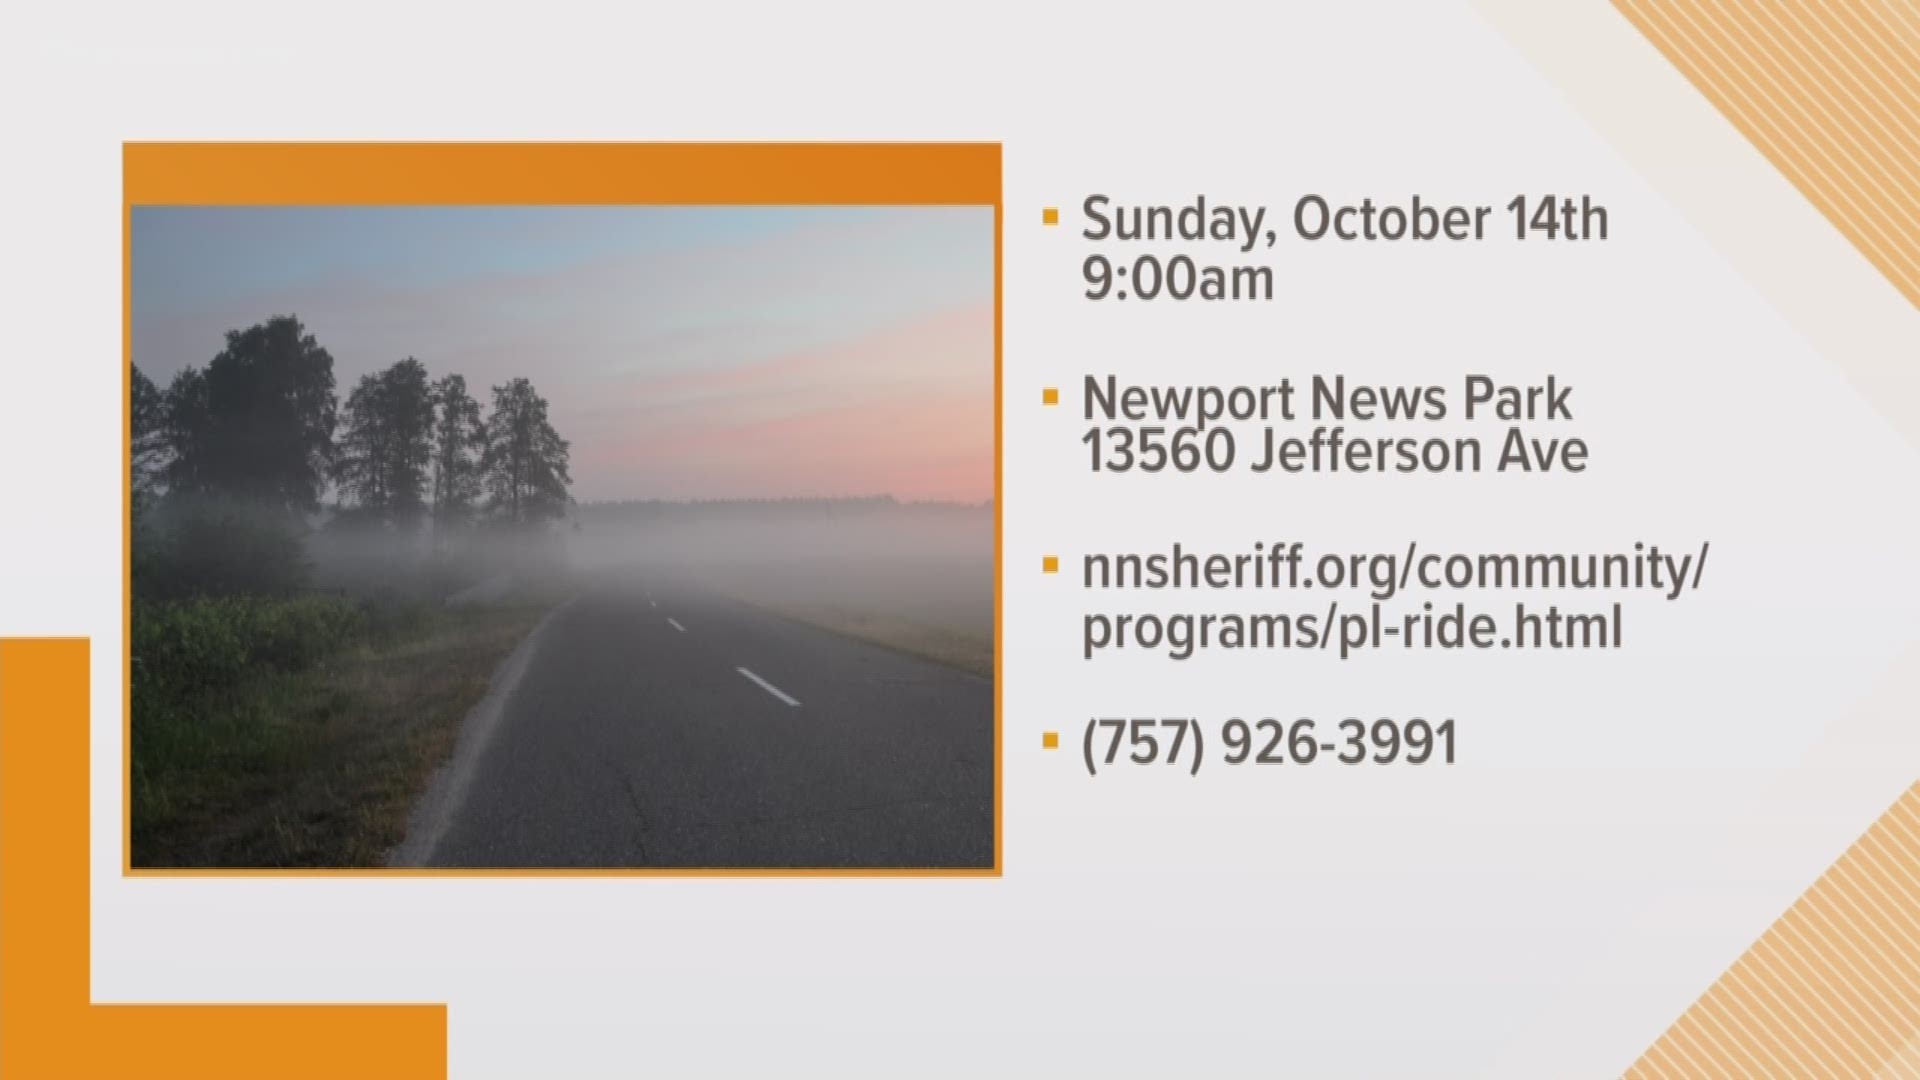 The 5th annual Escorted Motorcycle Ride raises money for the Newport News Sheriff's Office's Project Lifesaver program.